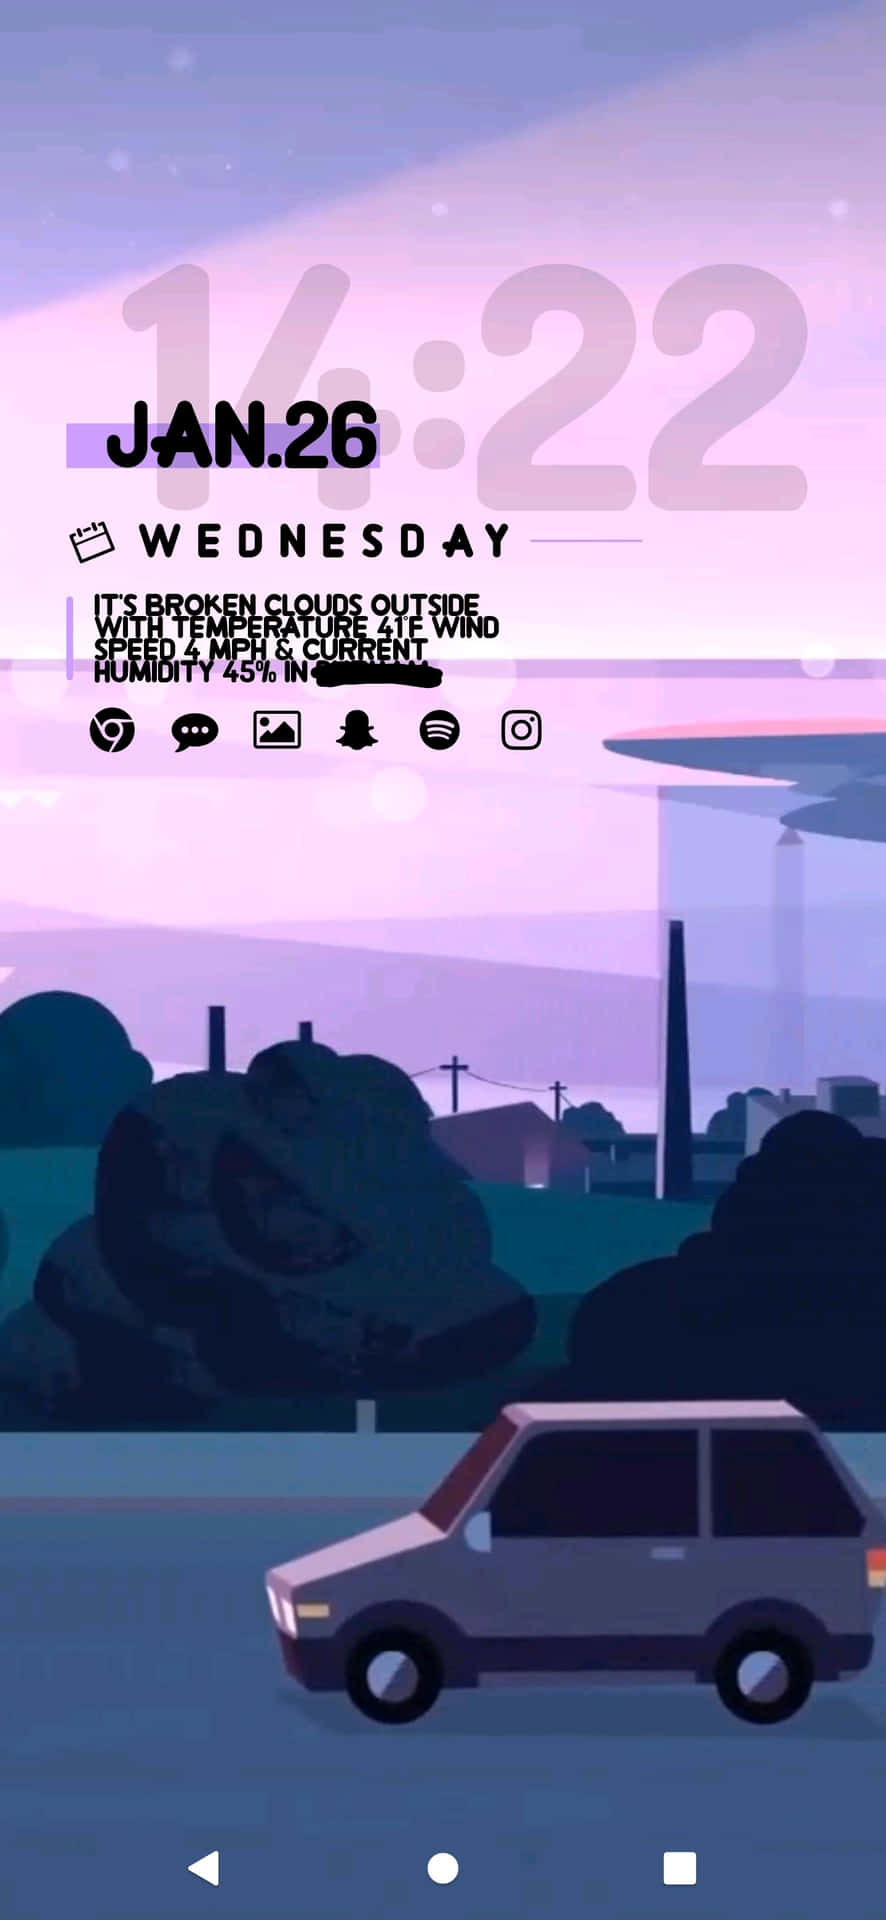 Get Ahead of the Curve with the Steven Universe Phone Wallpaper